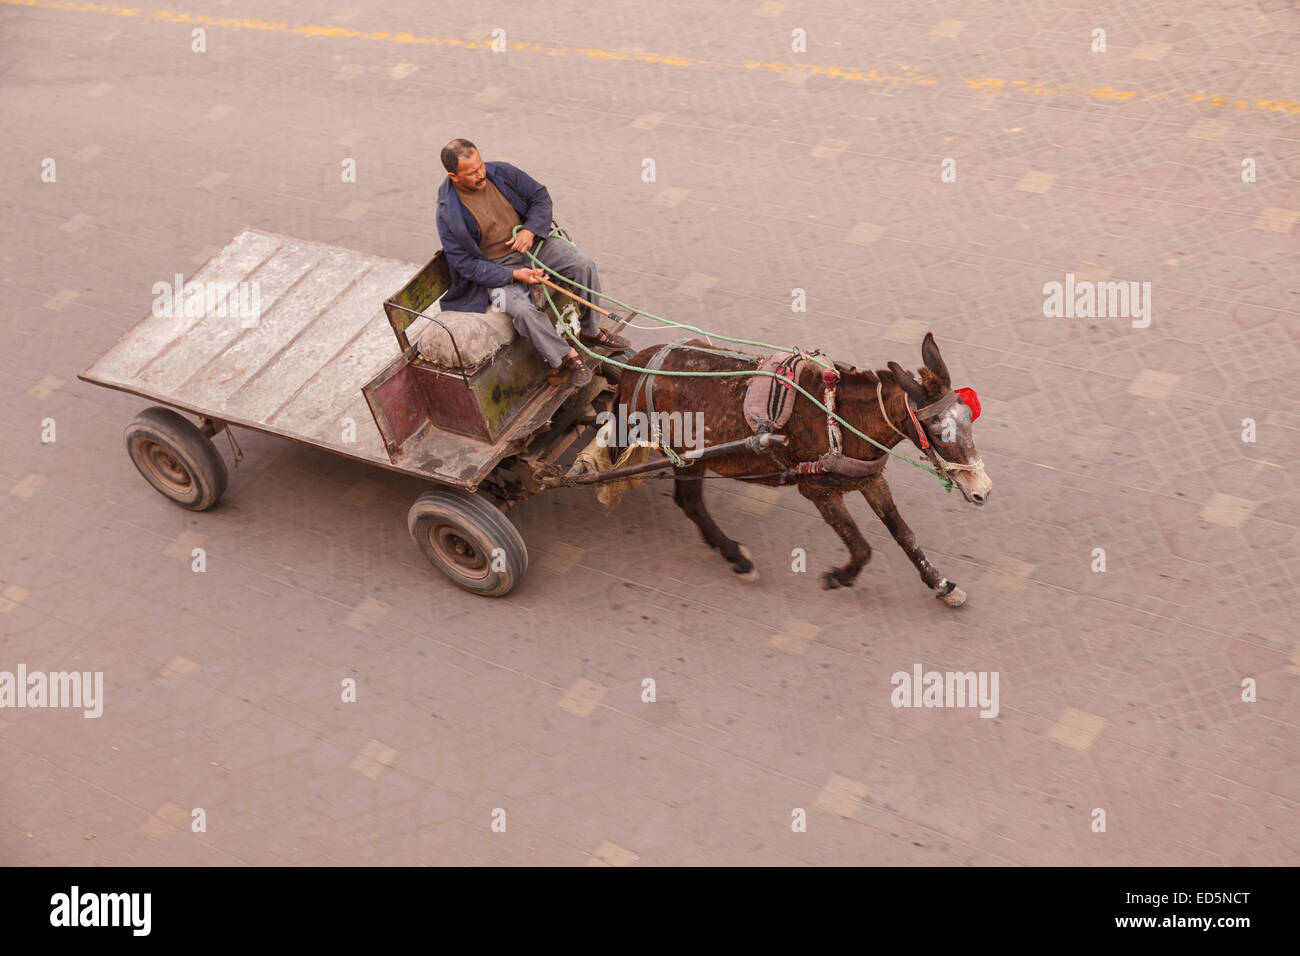 Donkey. Street. Marrakech, Morocco. North Africa, Africa Stock Photo